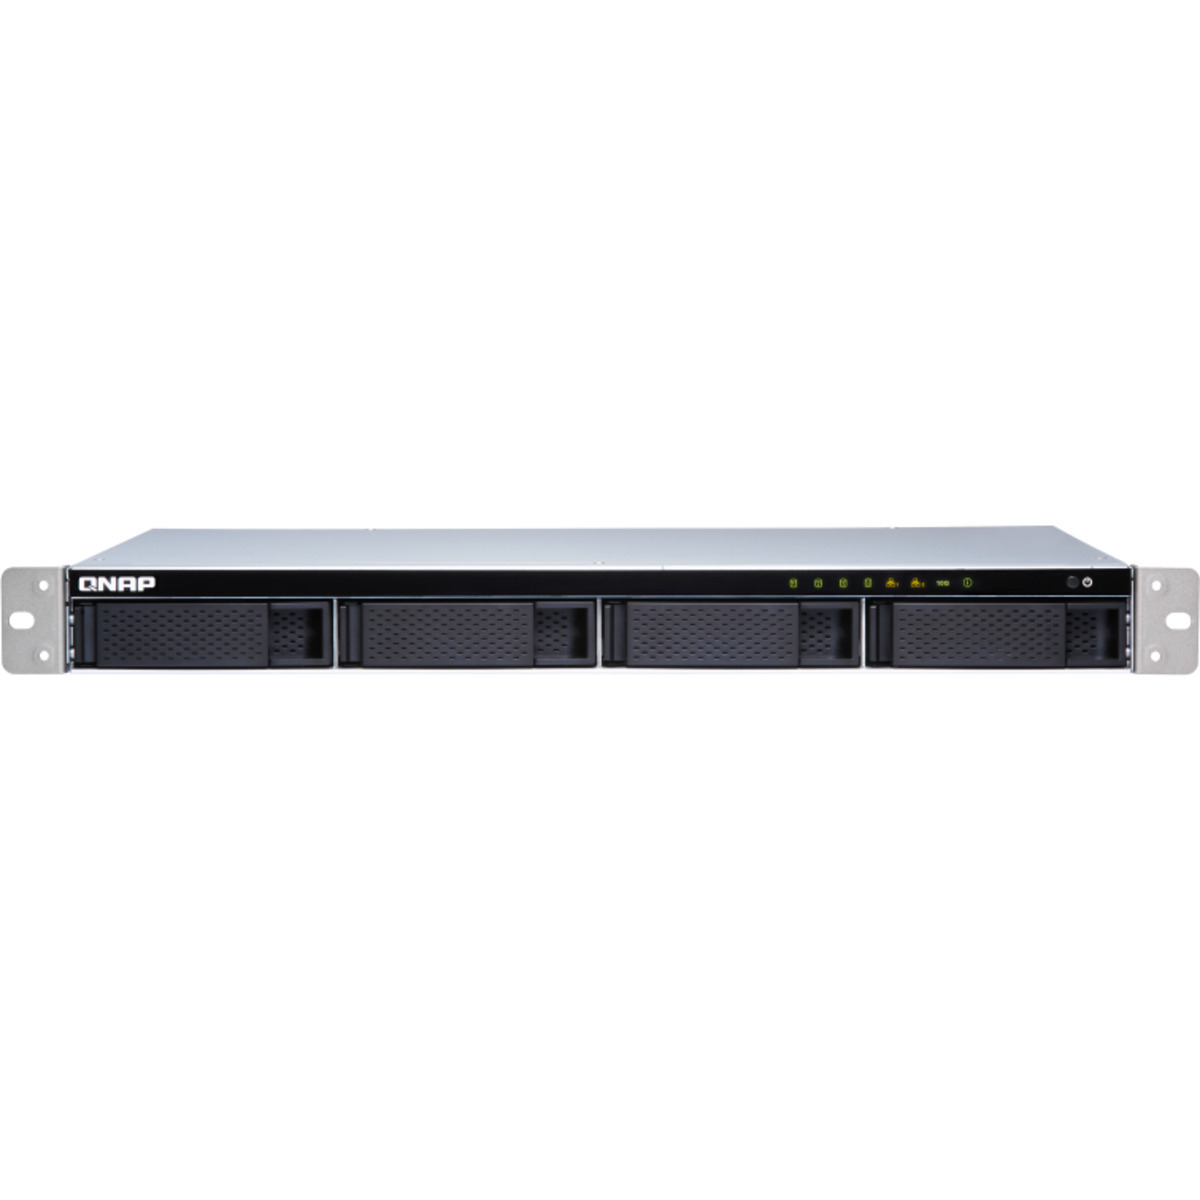 QNAP TS-431XeU RackMount 4-Bay Multimedia / Power User / Business NAS - Network Attached Storage Device Burn-In Tested Configurations - FREE RAM UPGRADE TS-431XeU